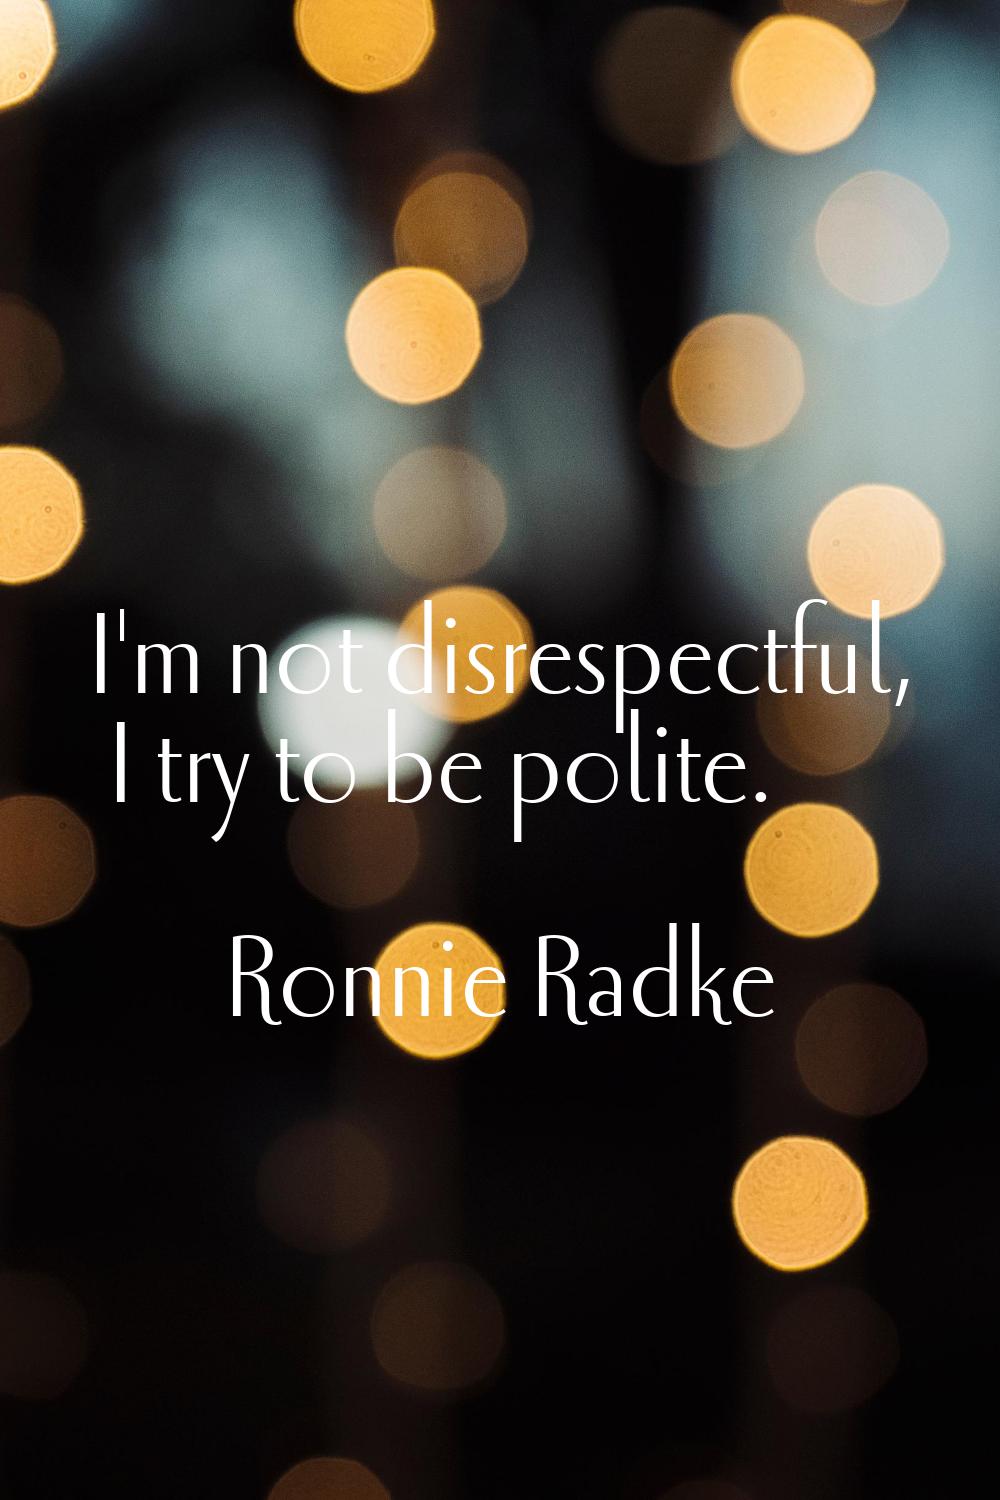 I'm not disrespectful, I try to be polite.